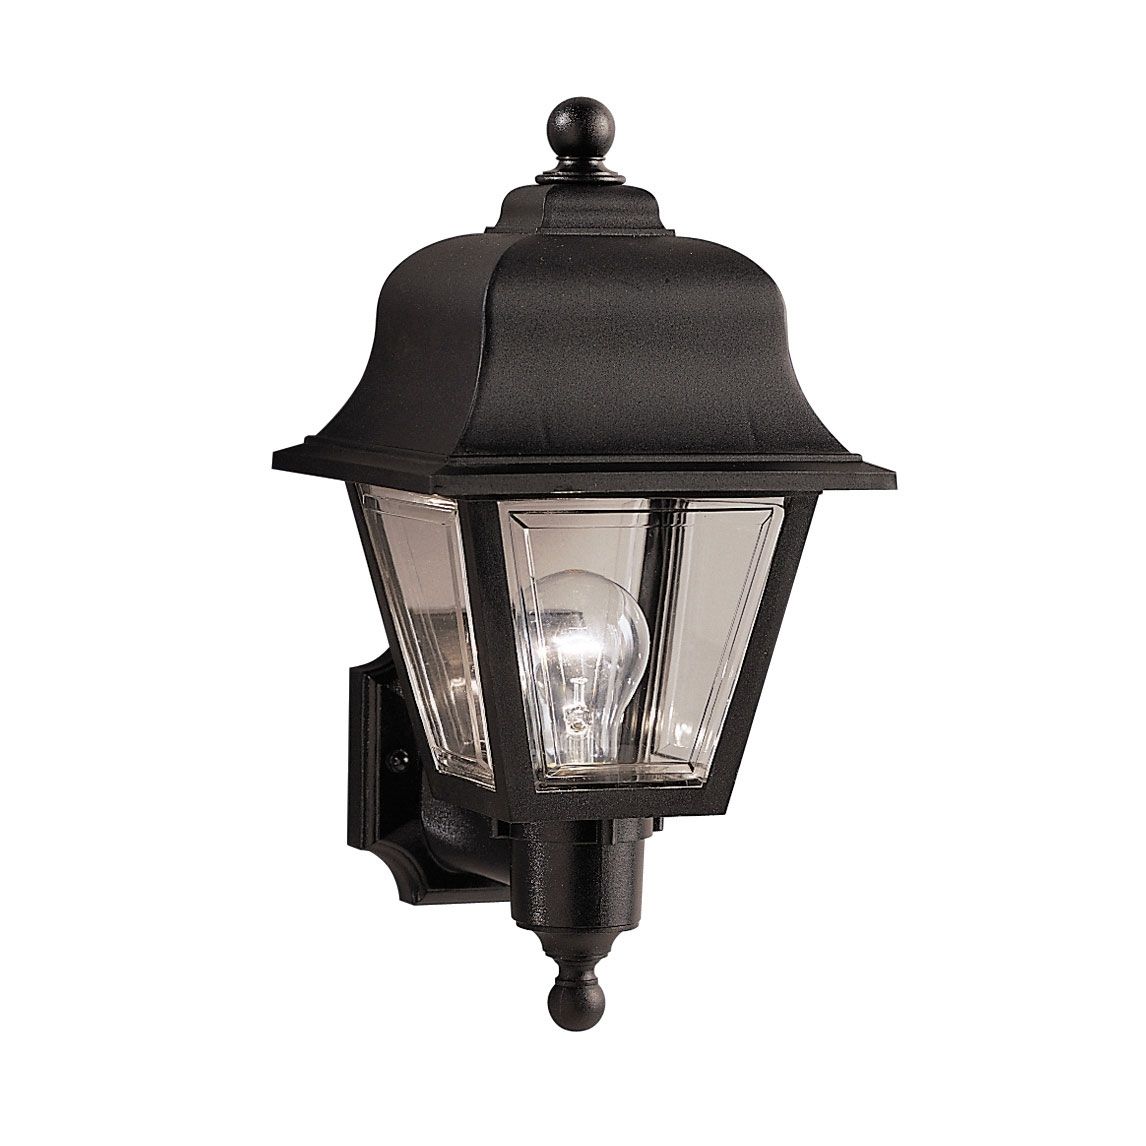 Light : Outdoor Led Wall Lighting Fixtures Mount Lights Outside In Hanging Outdoor Security Lights (Photo 4 of 15)